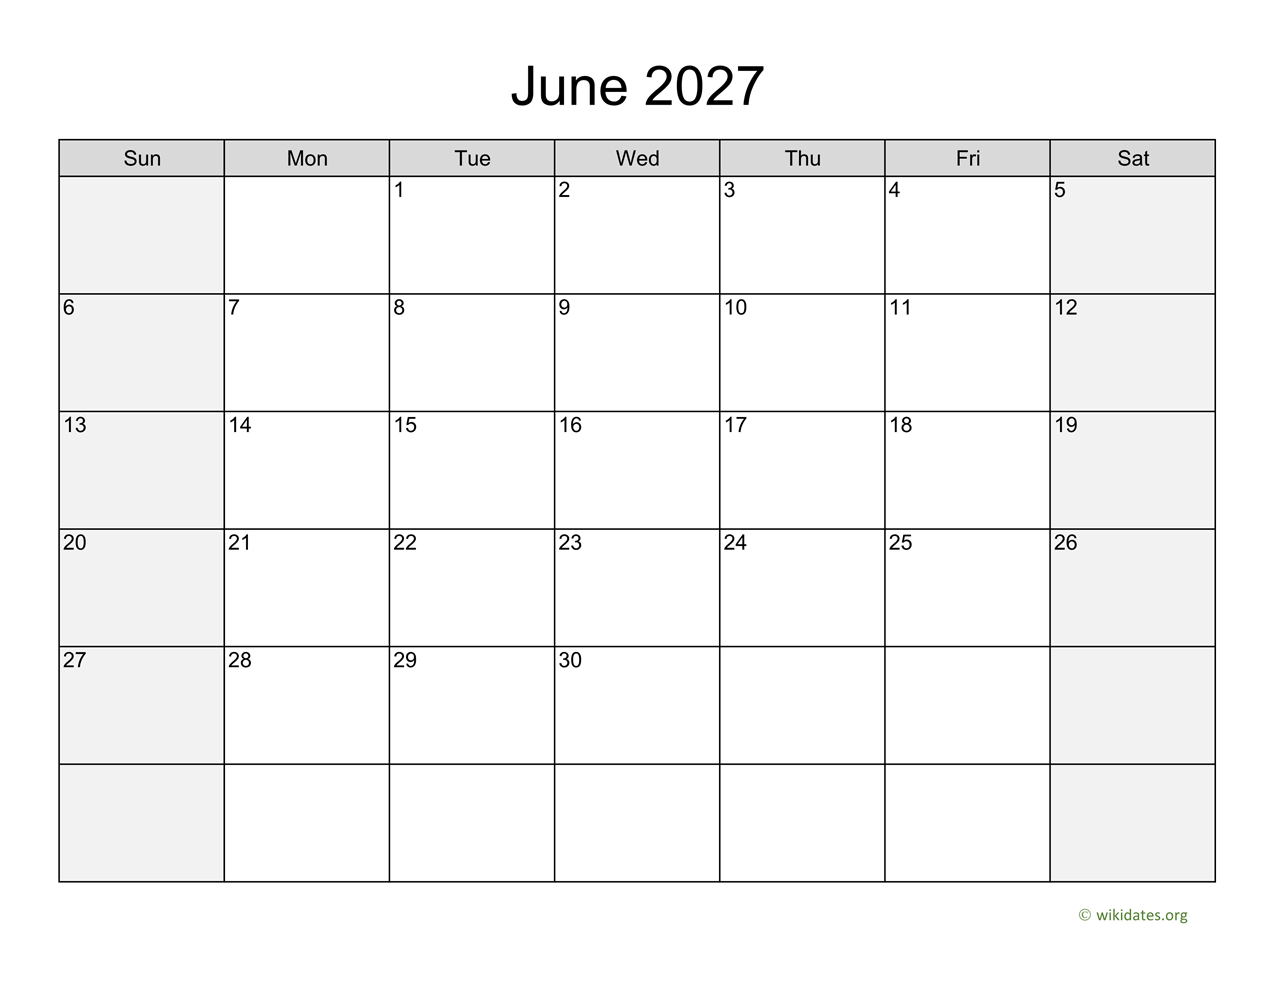 June 2027 Calendar with Weekend Shaded | WikiDates.org